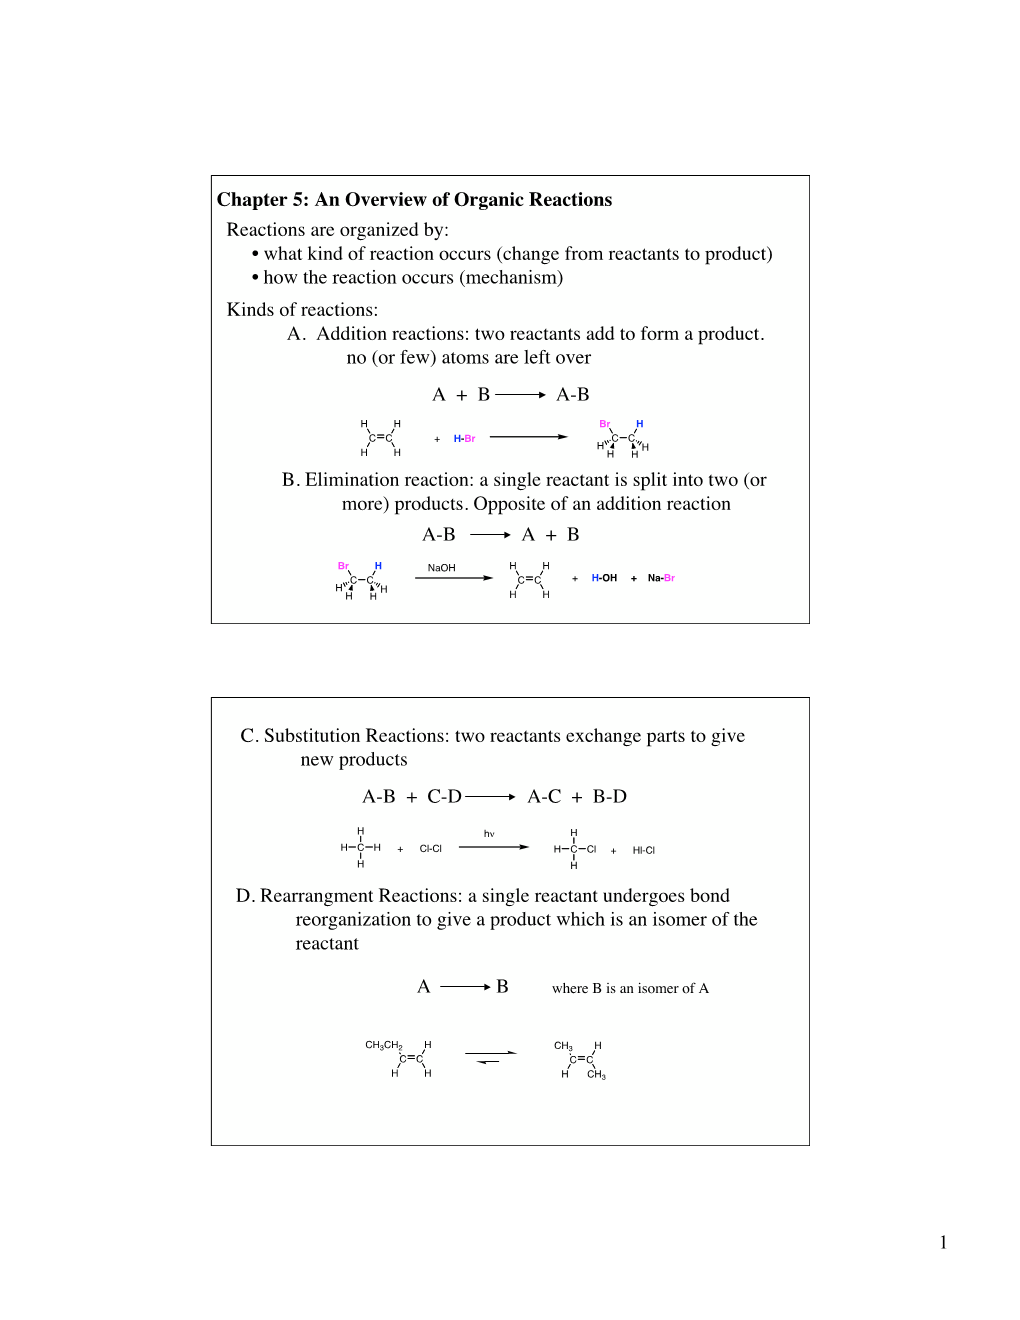 1 Chapter 5: an Overview of Organic Reactions Reactions Are Organized By: • What Kind of Reaction Occurs (Change from Reactant